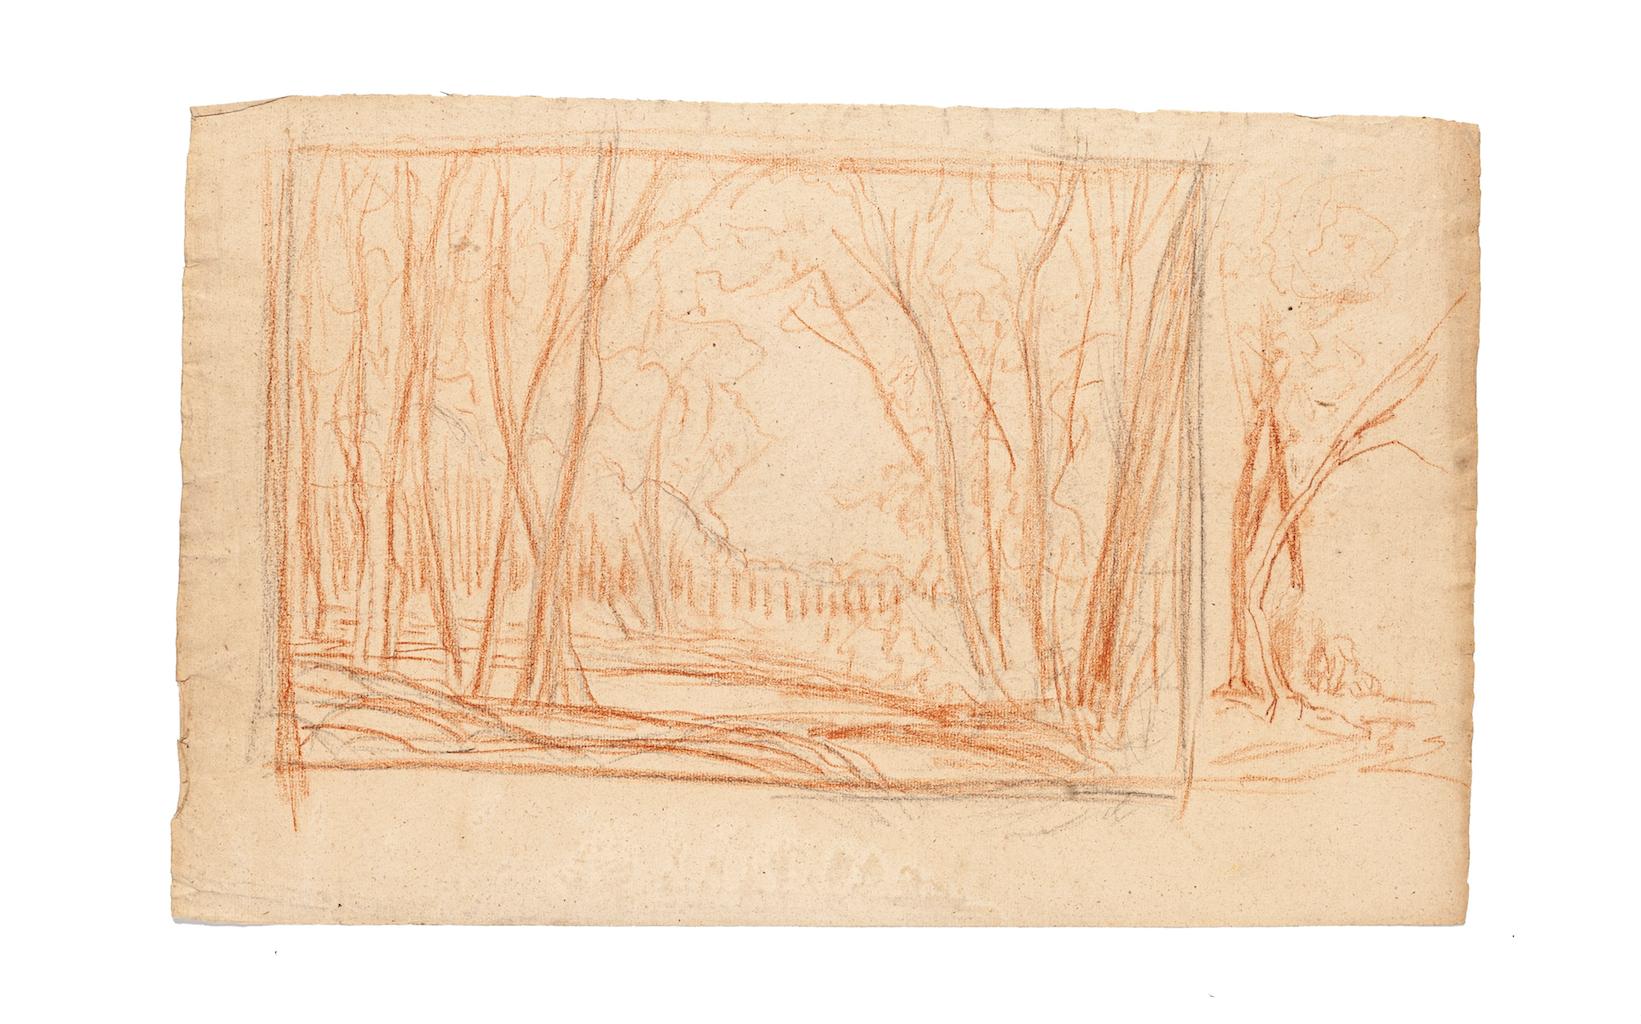 Unknown Figurative Art - Landscape - Original Drawing in Pencil and Sanguine on Paper - 19th Century